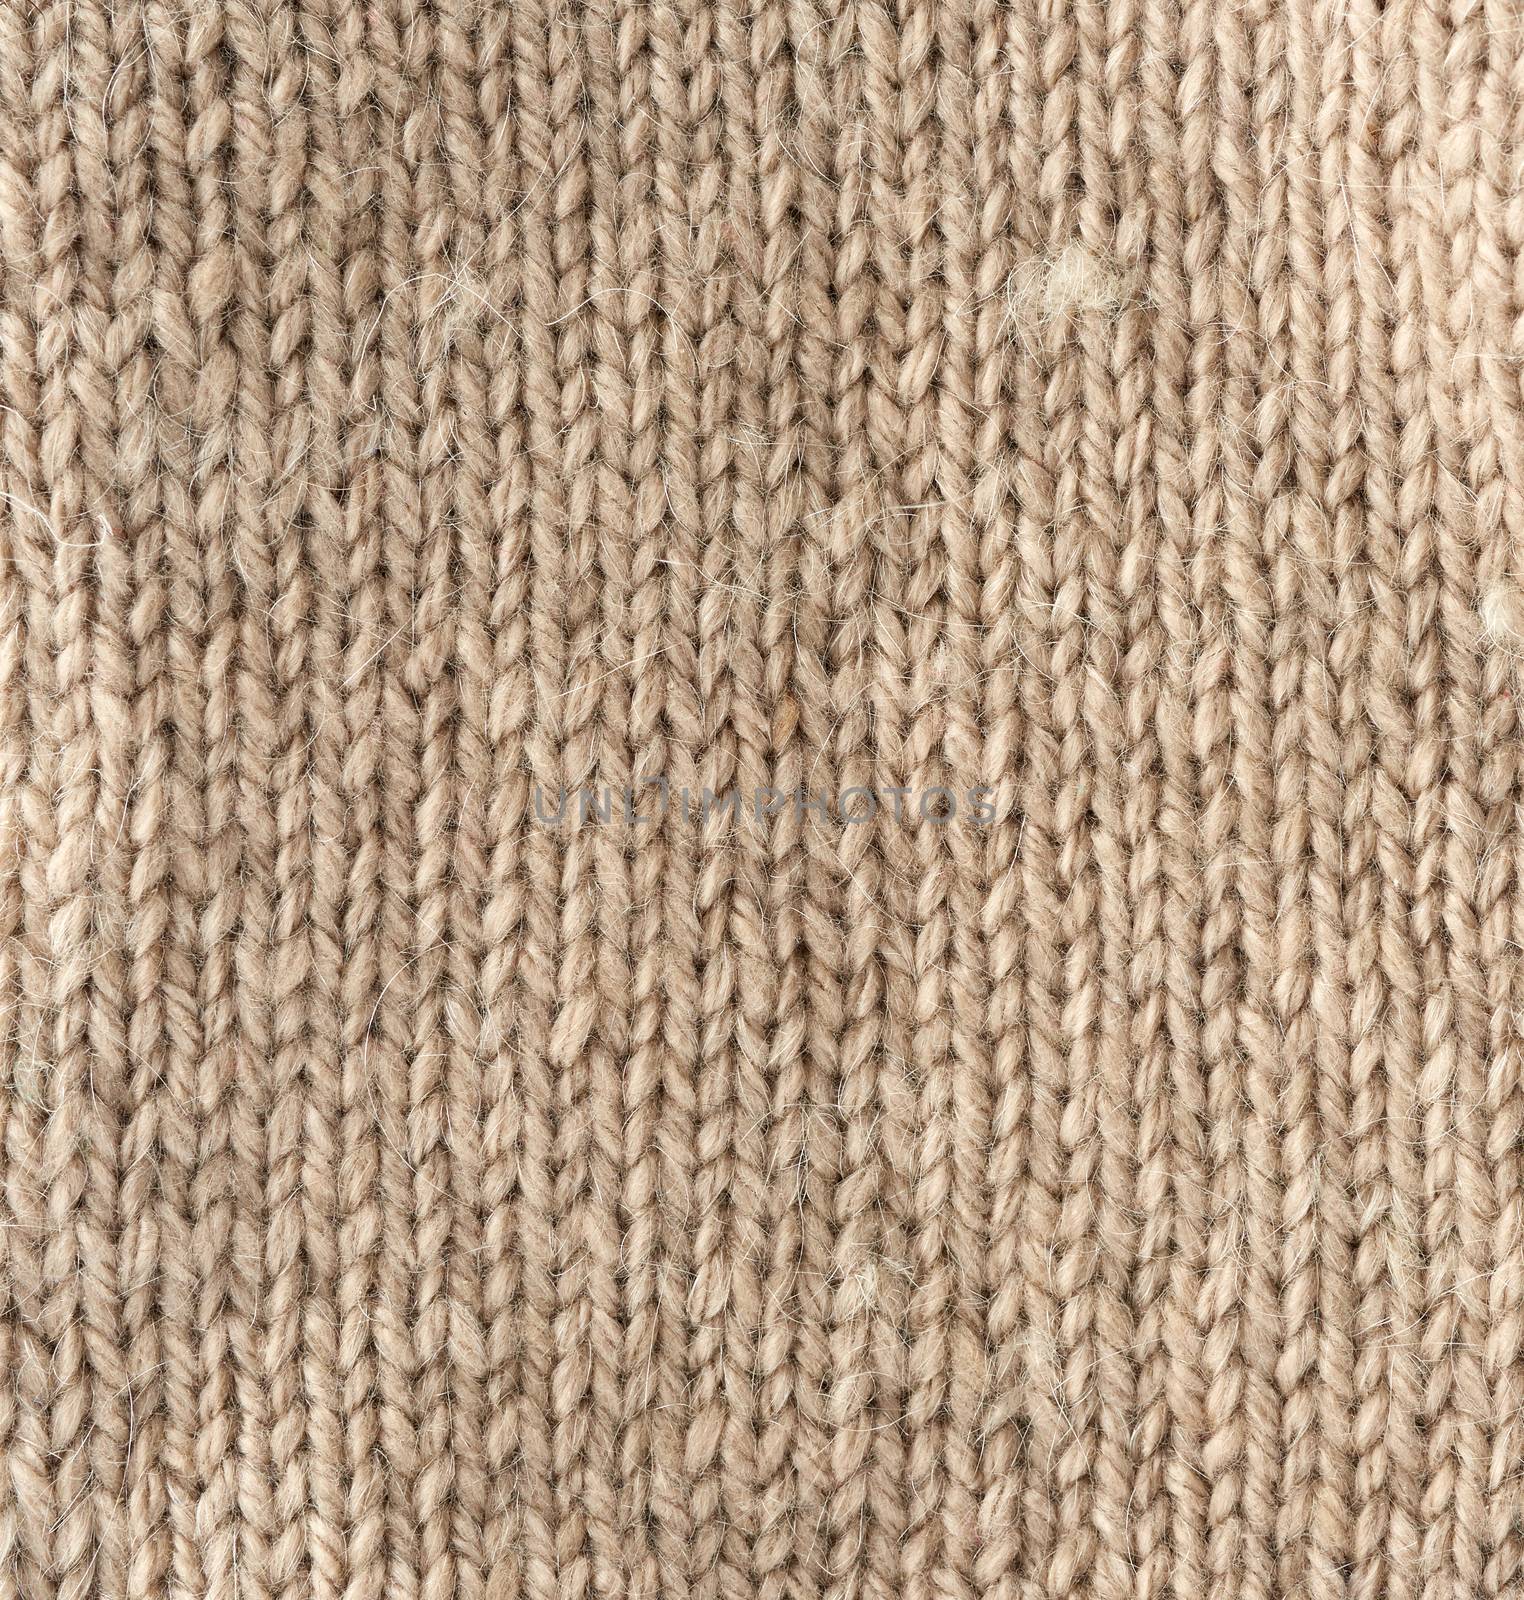 fragment of knitted fabric from light brown wool of a sheep, pigtail pattern